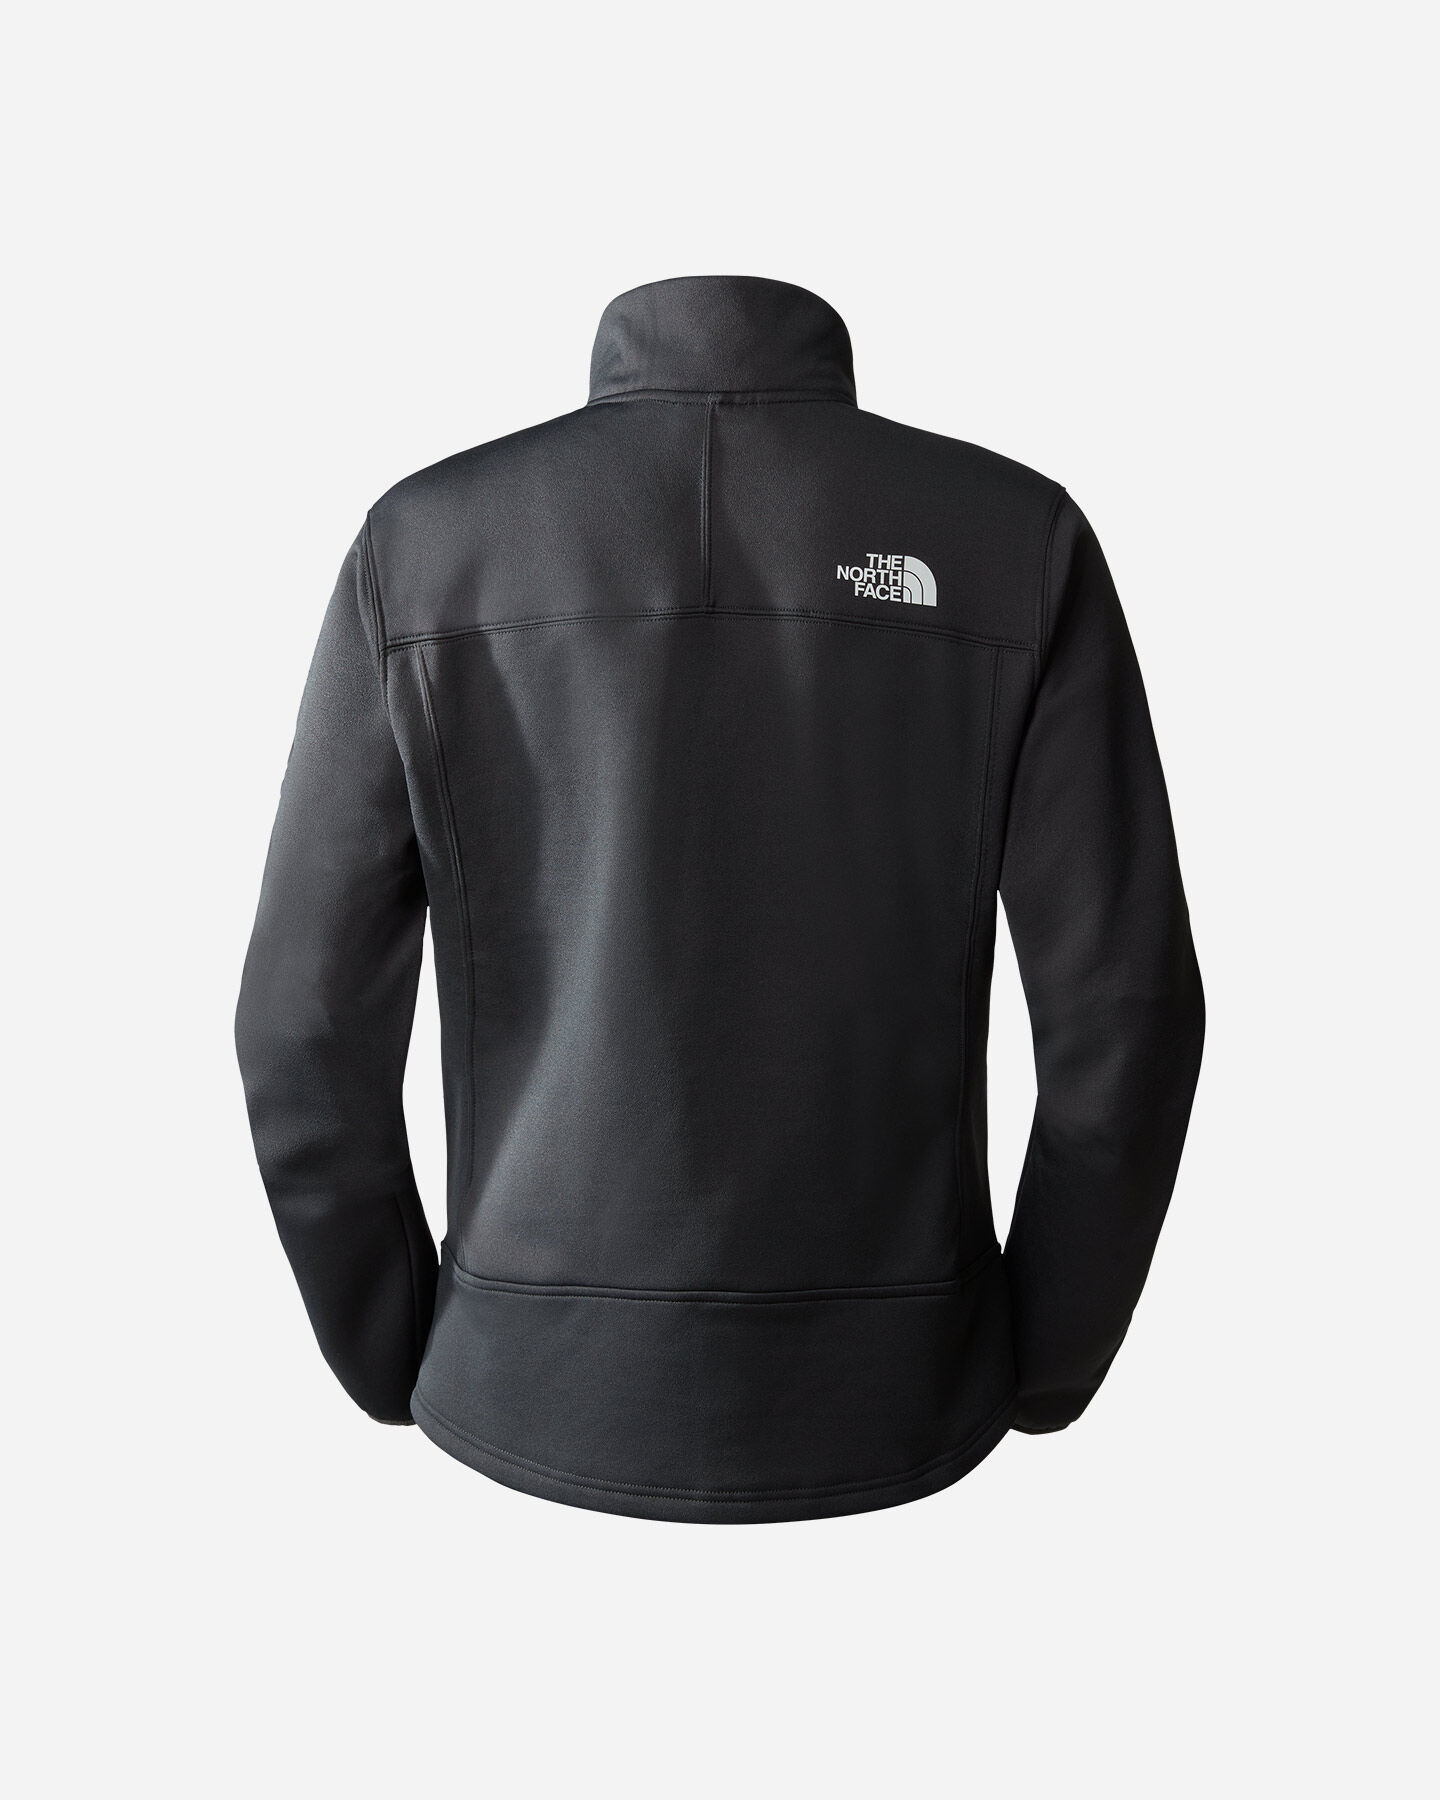  Pile THE NORTH FACE MISTYESCAPE W S5599056|MN8|M scatto 1